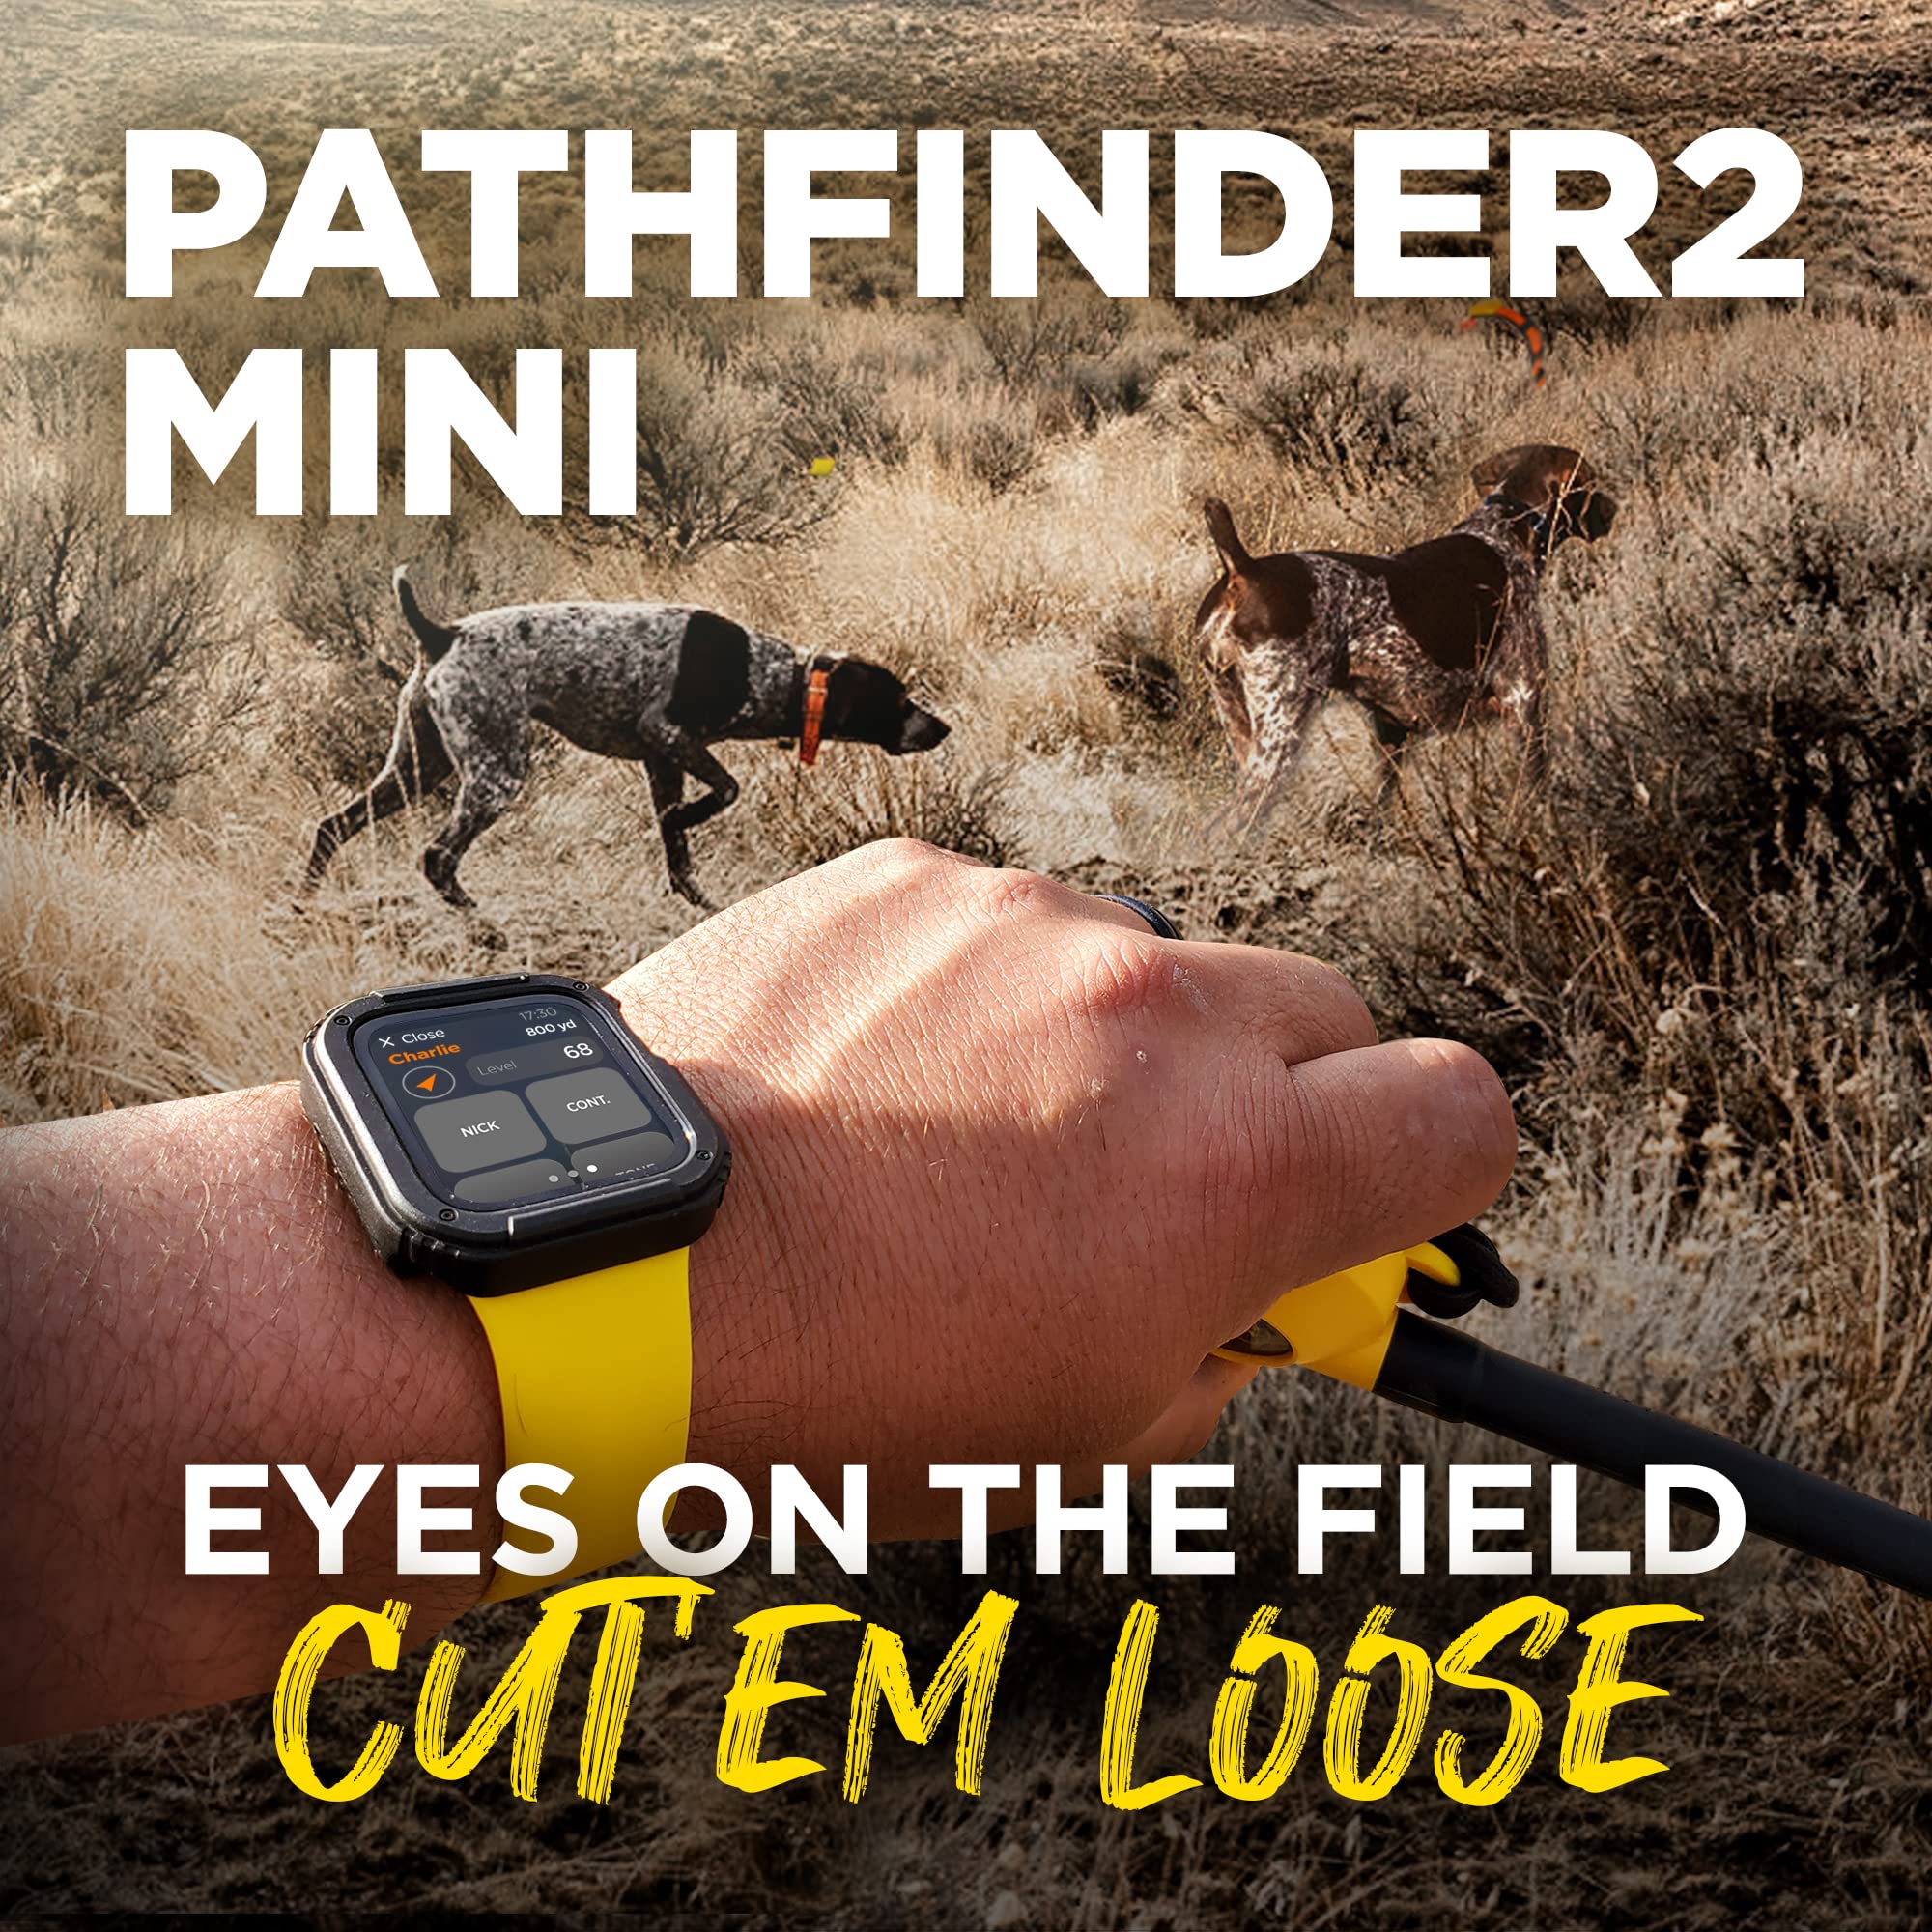 Dogtra PATHFINDER 2 MINI Additional Receiver Dog GPS Tracker e Collar Green LED Light No monthly fees Free App Waterproof Smartwatch control Satellite Real Time tracking long range Smartphone required